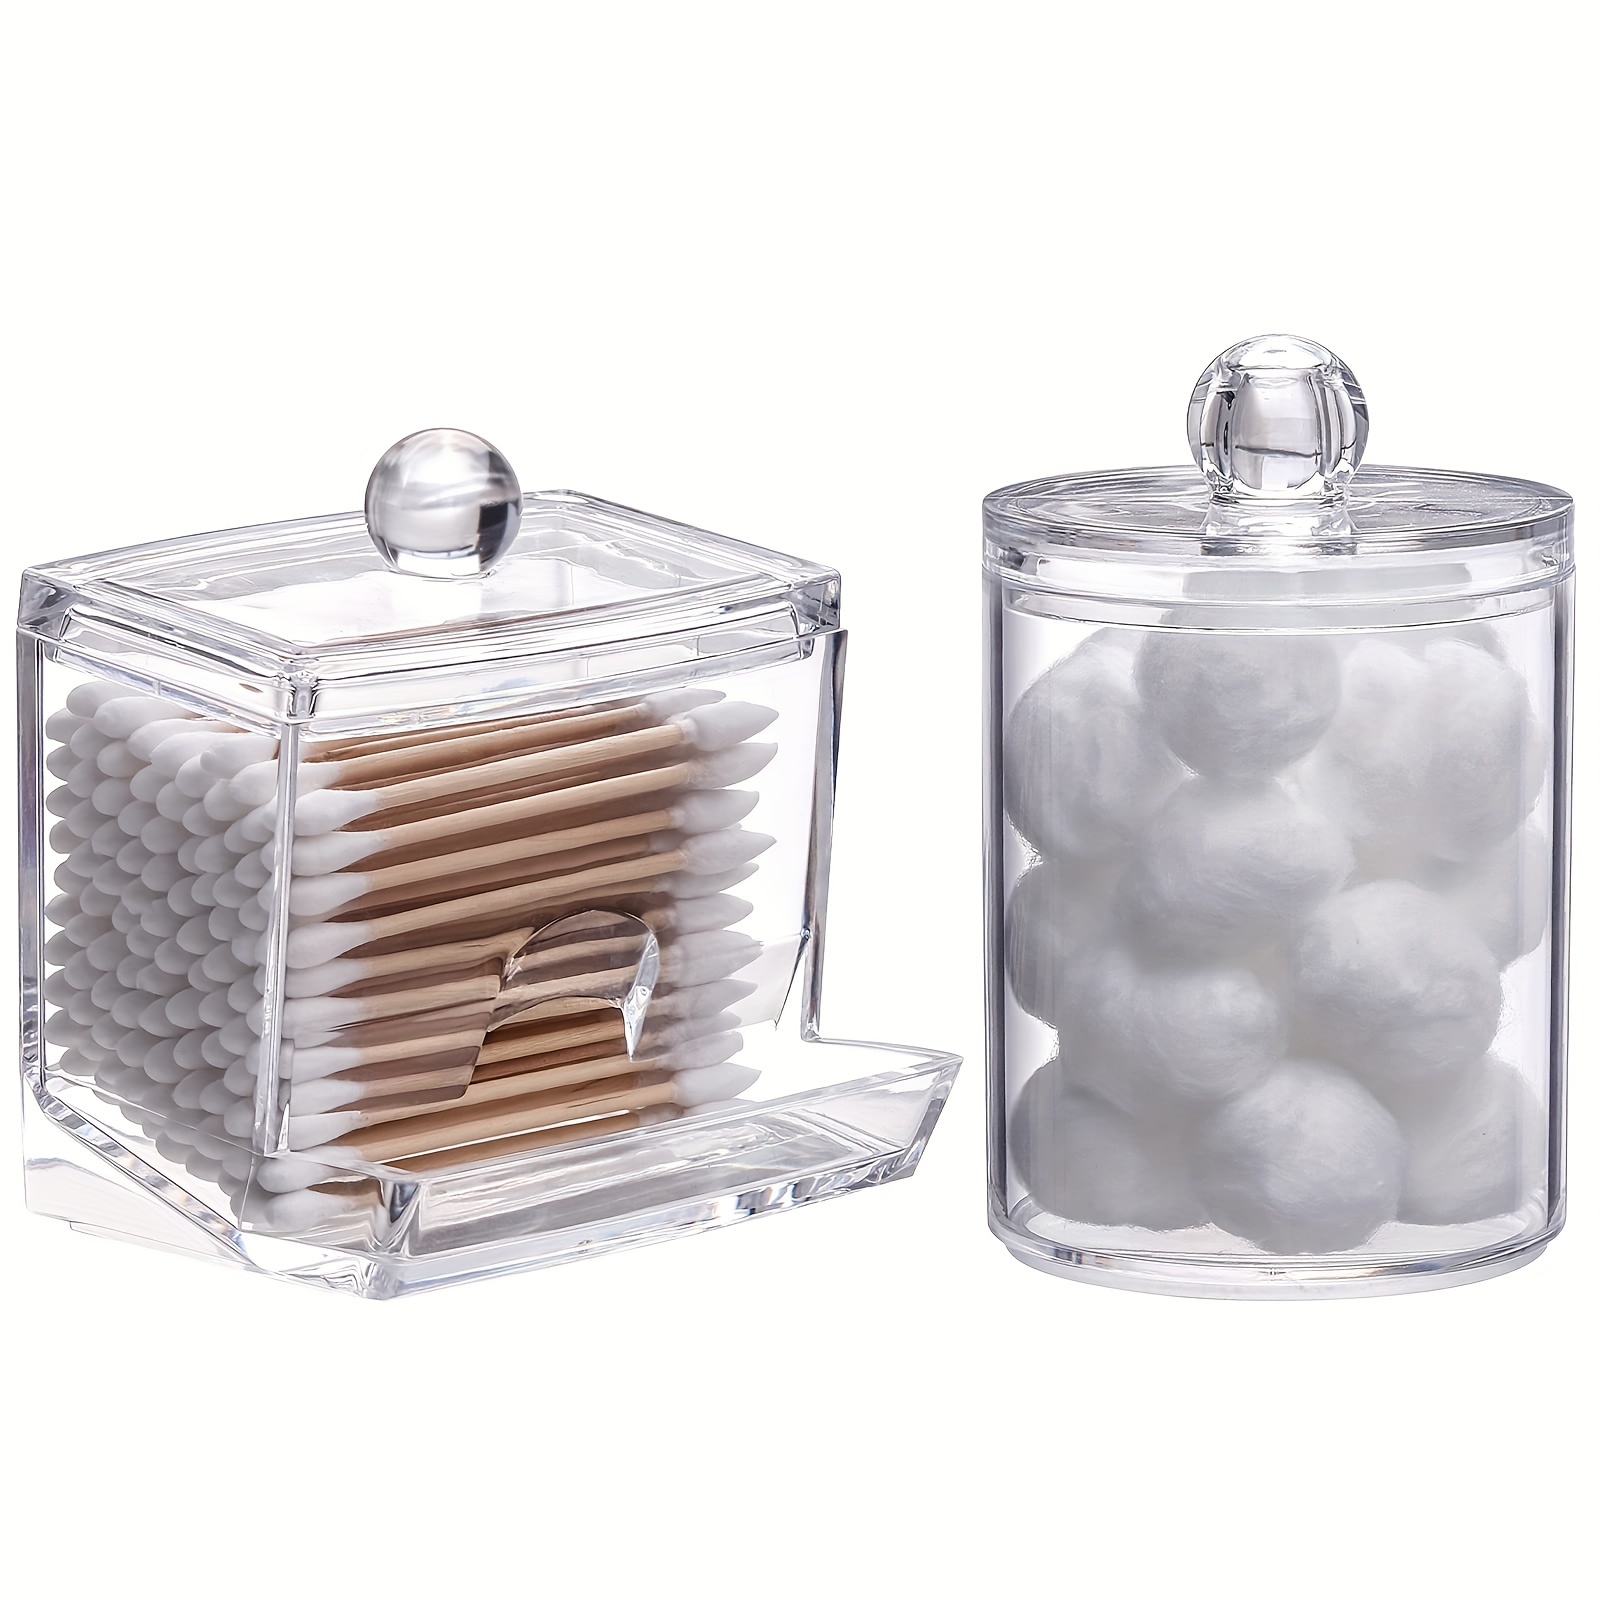 Home Deals! Wqqzjj Storage and Organization Holder Dispenser for Cotton Ball,Cotton Swab,Cotton Round Pads,Clear Plastic Jar Set for Bathroom Canister